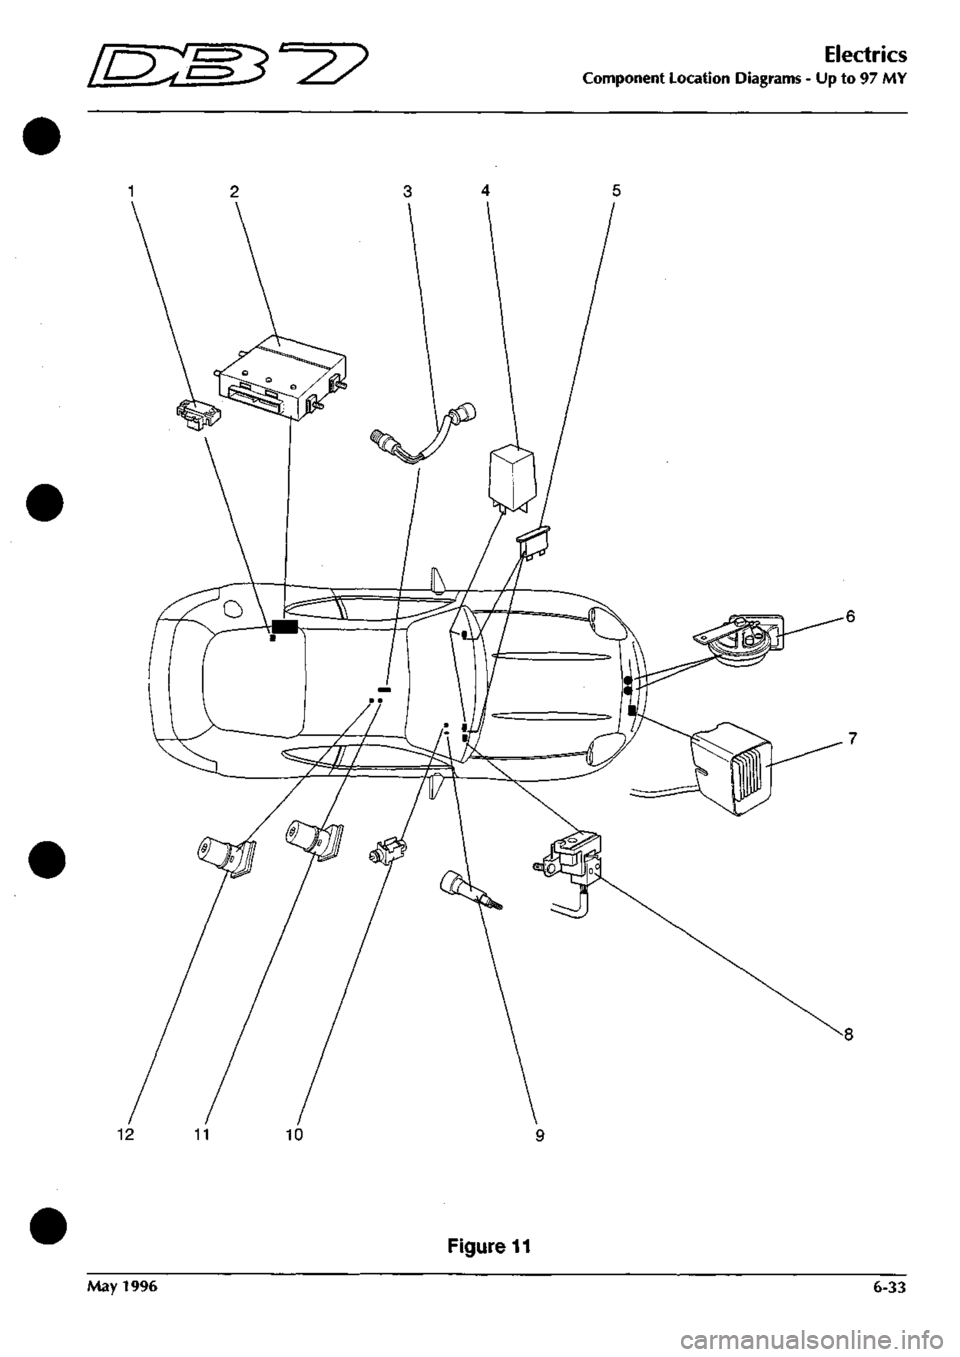 ASTON MARTIN DB7 1997 Service Manual 
[D:S3^2? 
Electrics 
Component Location Diagrams - Up to 97 MY 
May 1996 
Figure 11 
6-33  